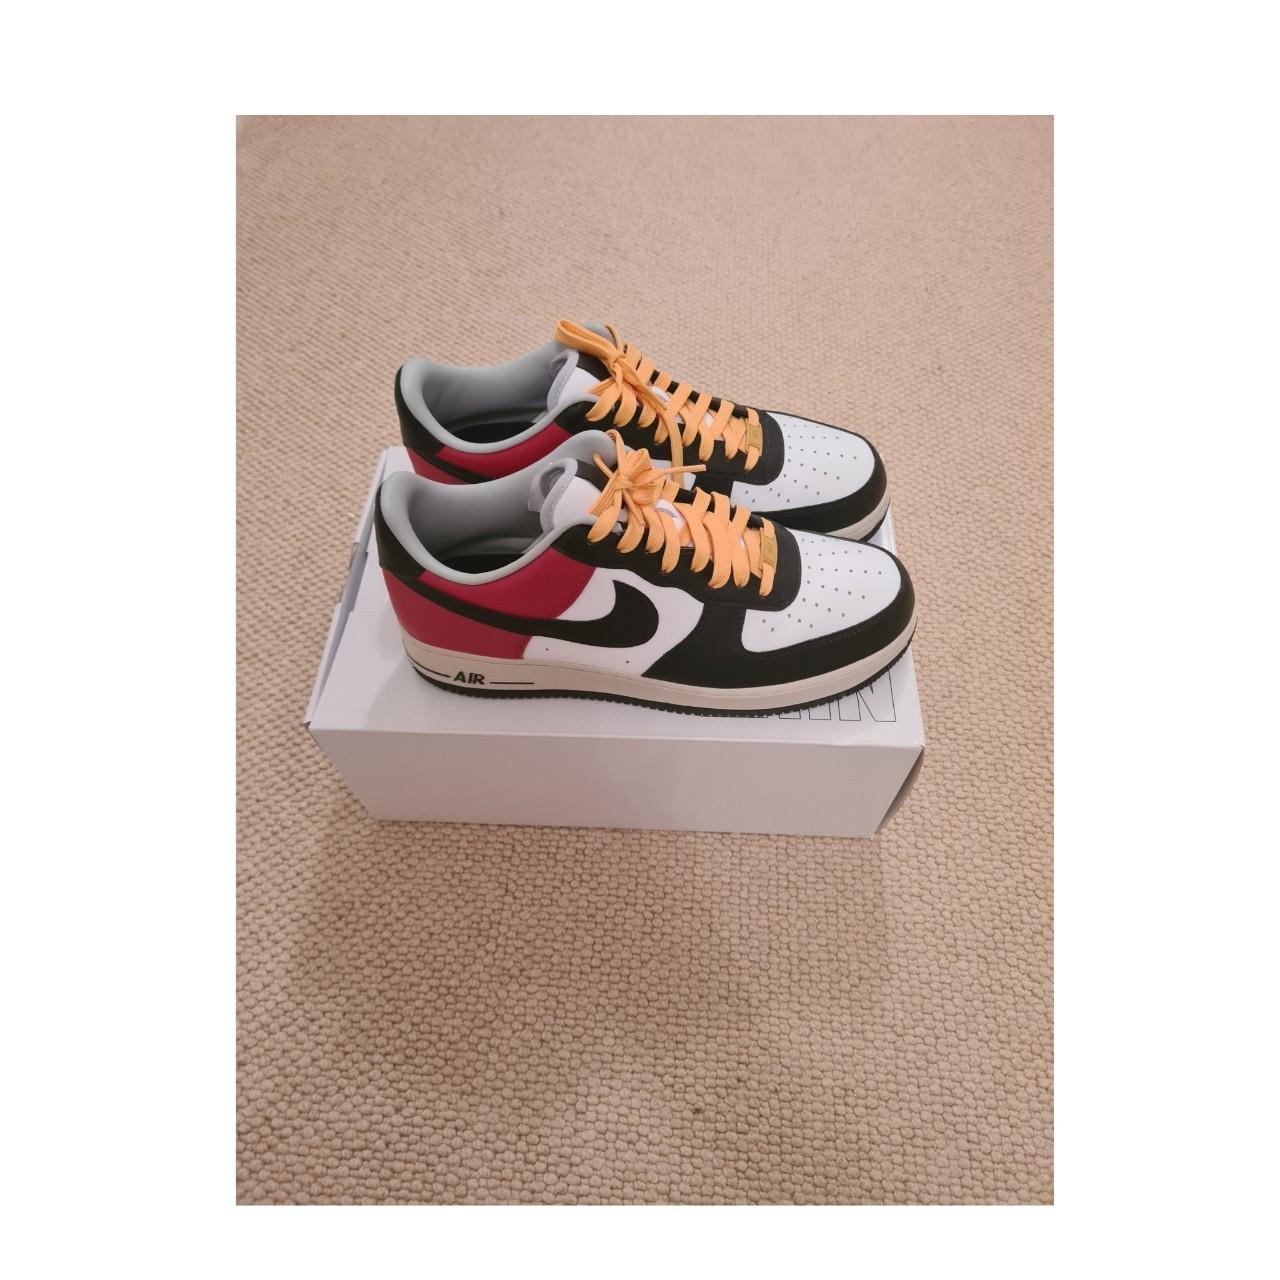 Nike Men's Red and Black Trainers | Depop